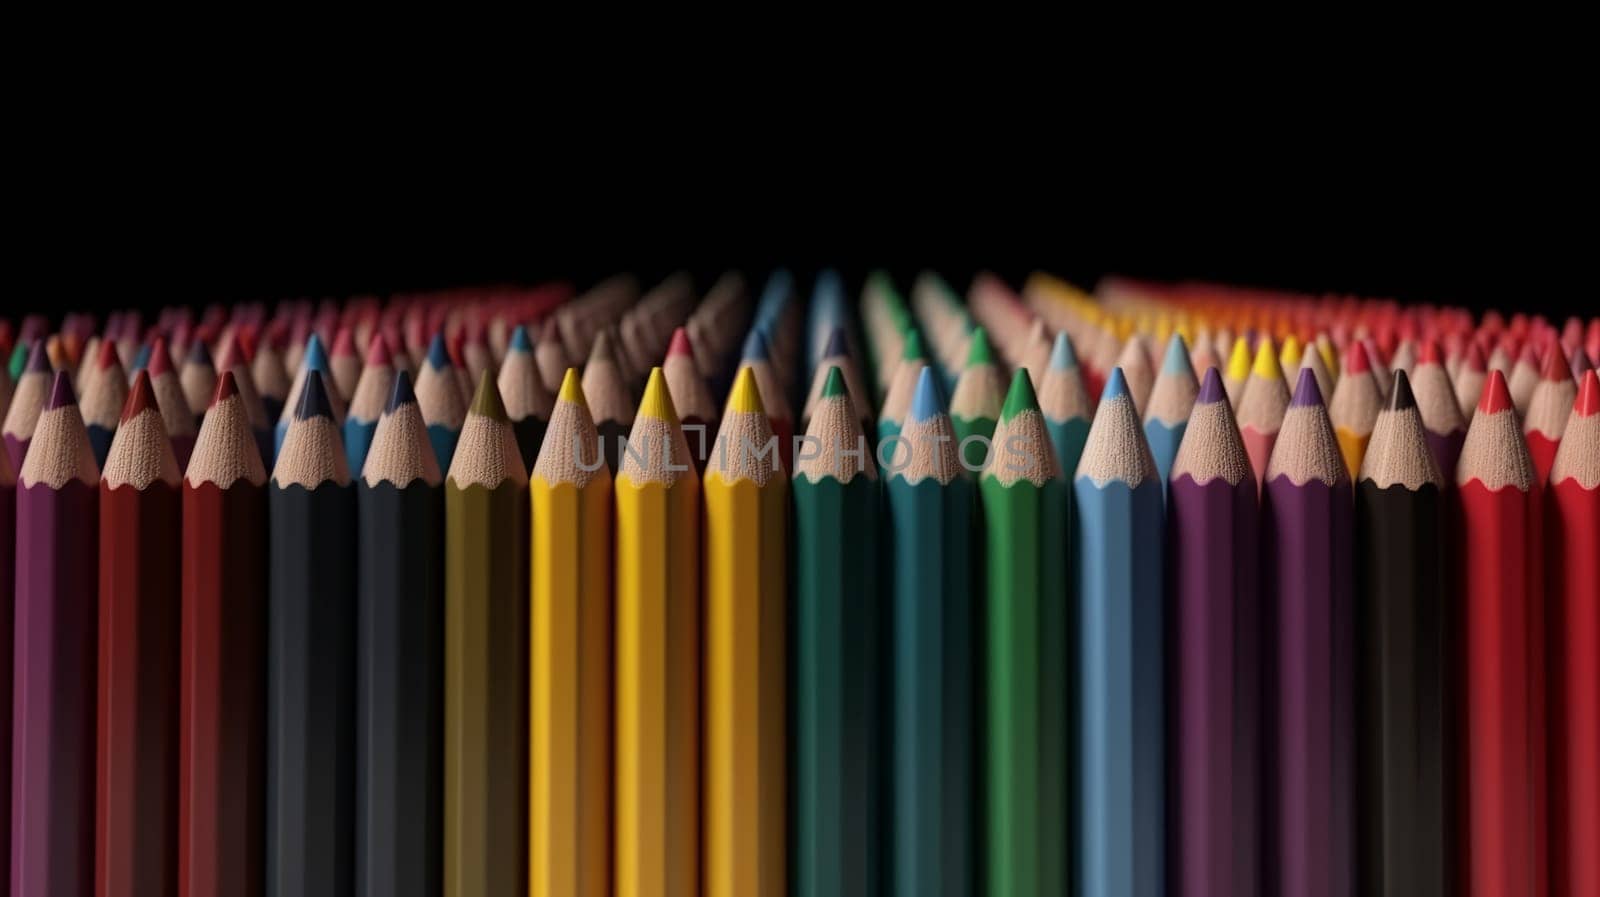 At the bottom, on a black background, there are rows of colored pencils.